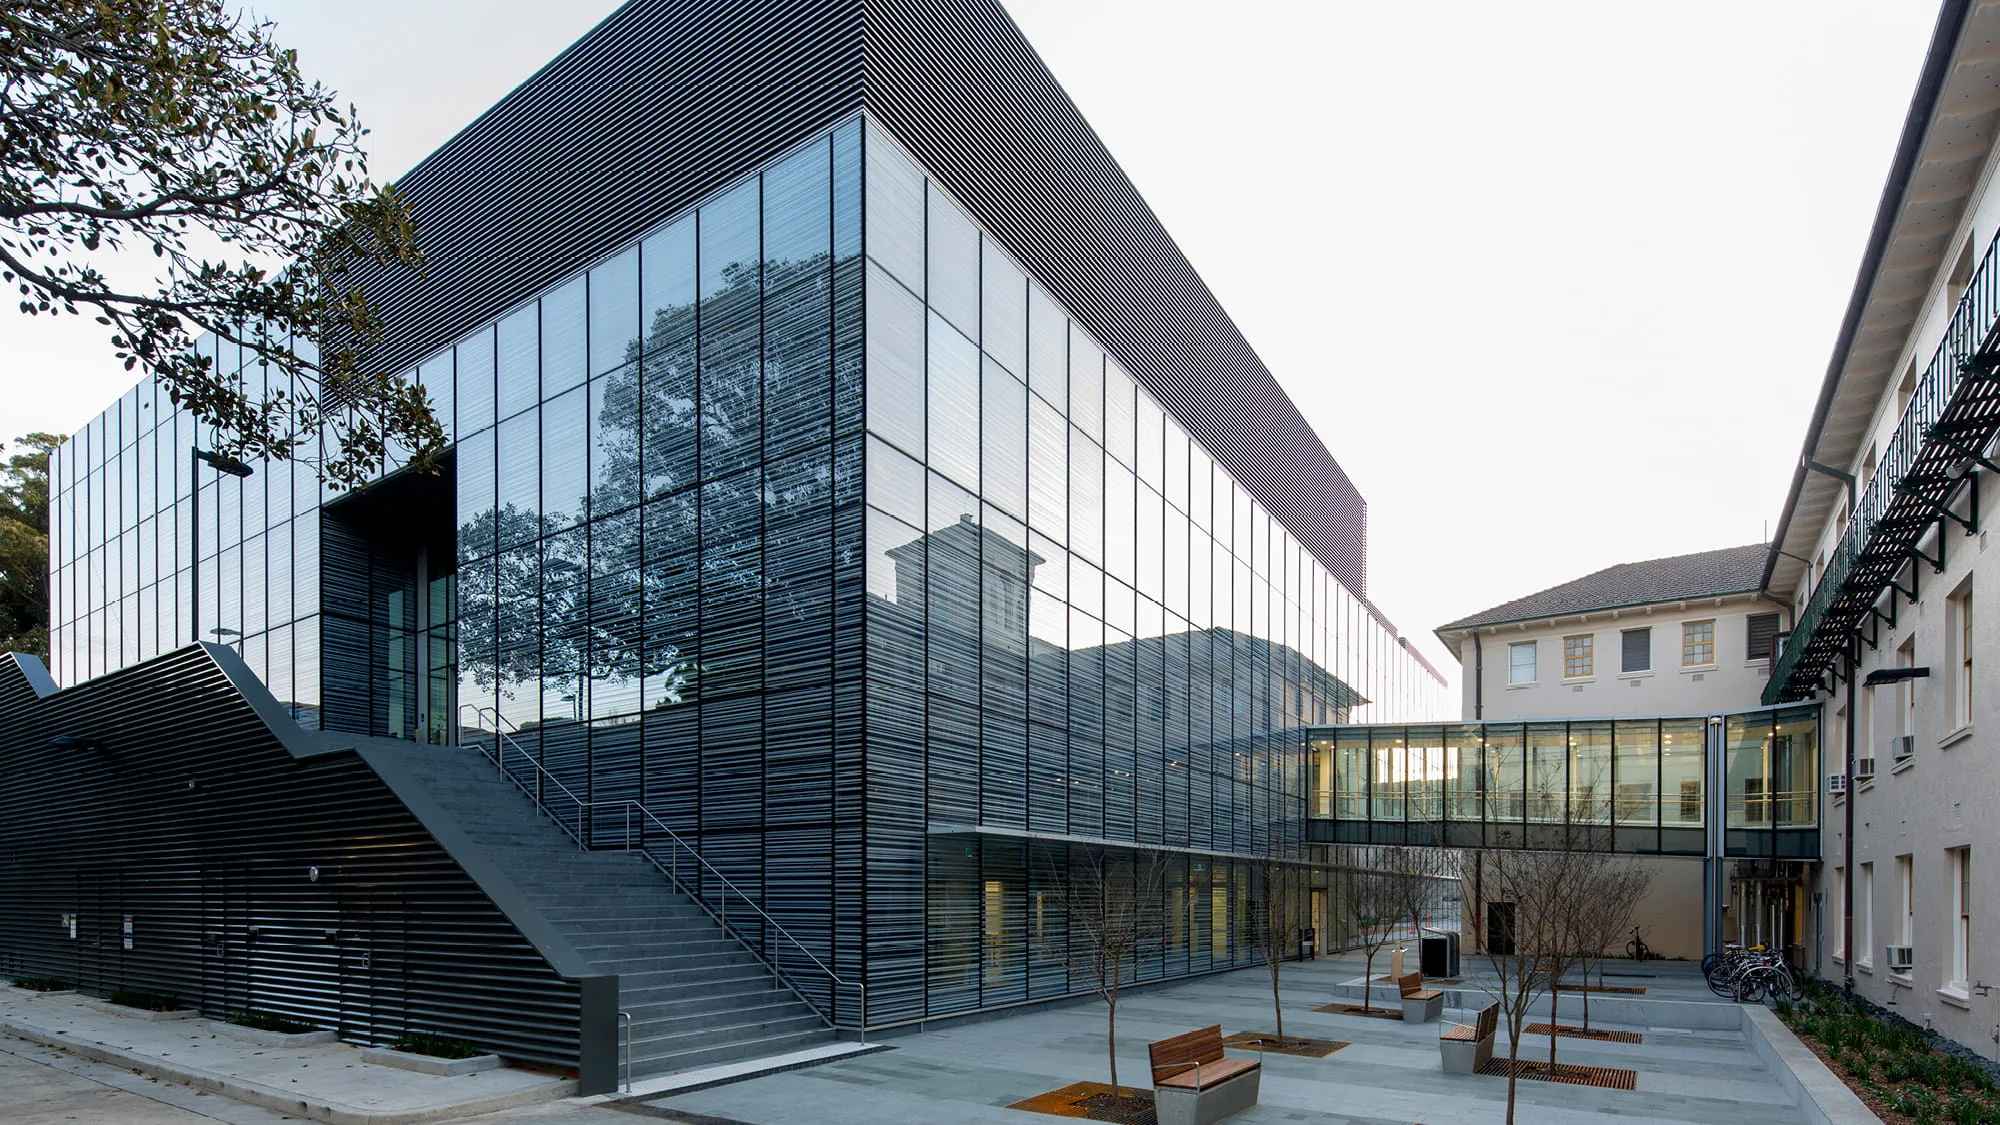 Exterior and courtyard of the nanoscale research centre building with reflections on the glass exterior